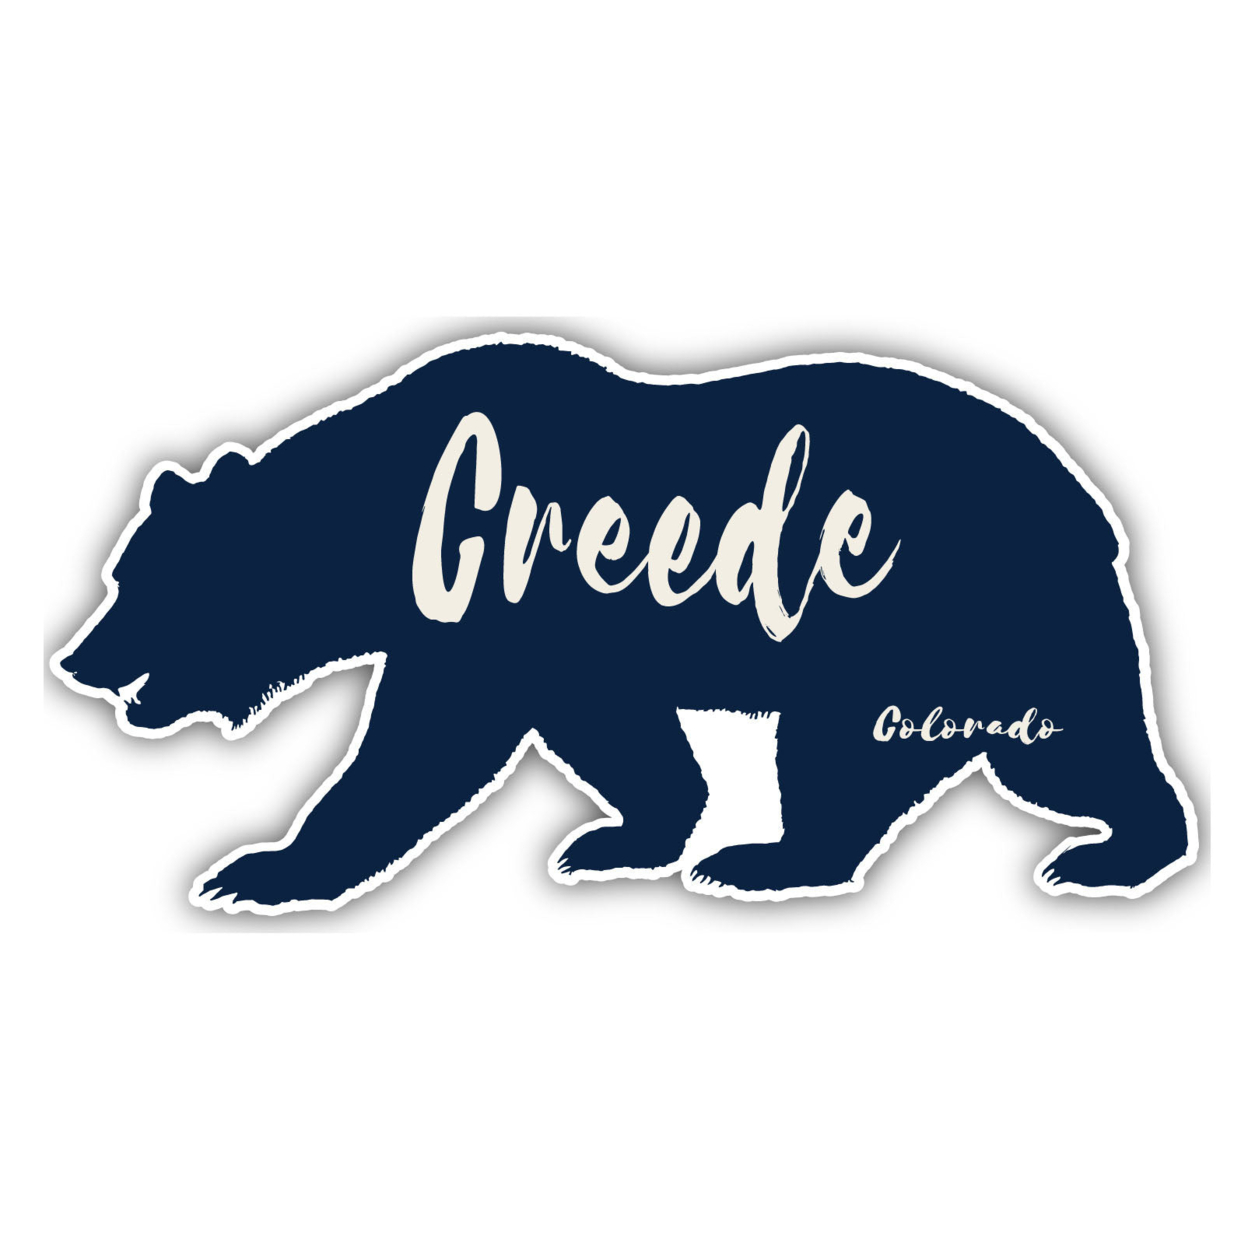 Creede Colorado Souvenir Decorative Stickers (Choose Theme And Size) - 4-Pack, 6-Inch, Camp Life